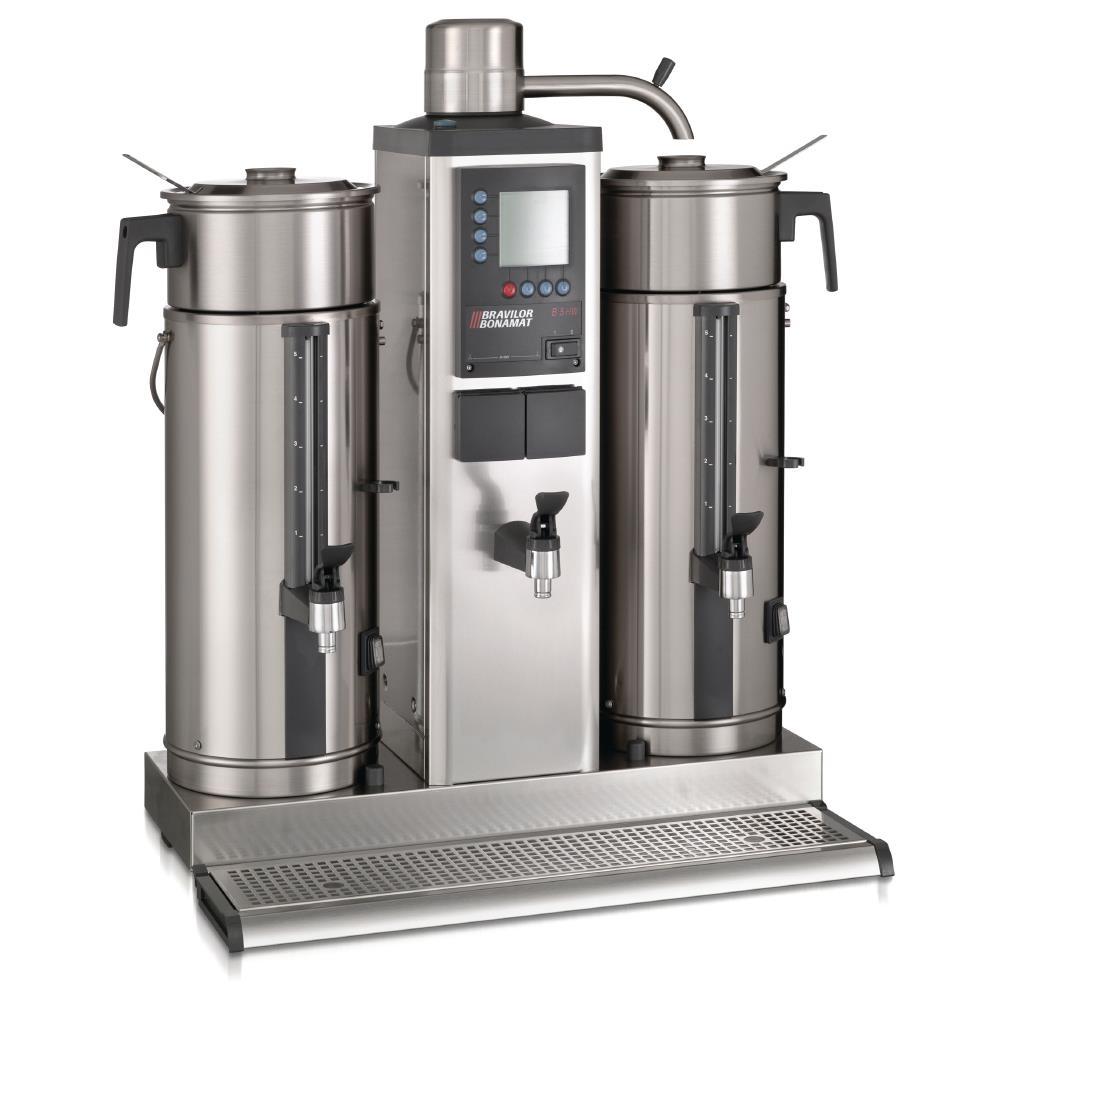 Bravilor B5 HW Bulk Coffee Brewer with 2x5Ltr Coffee Urns and Hot Water Tap Three Phase - DC687-3P  - 3